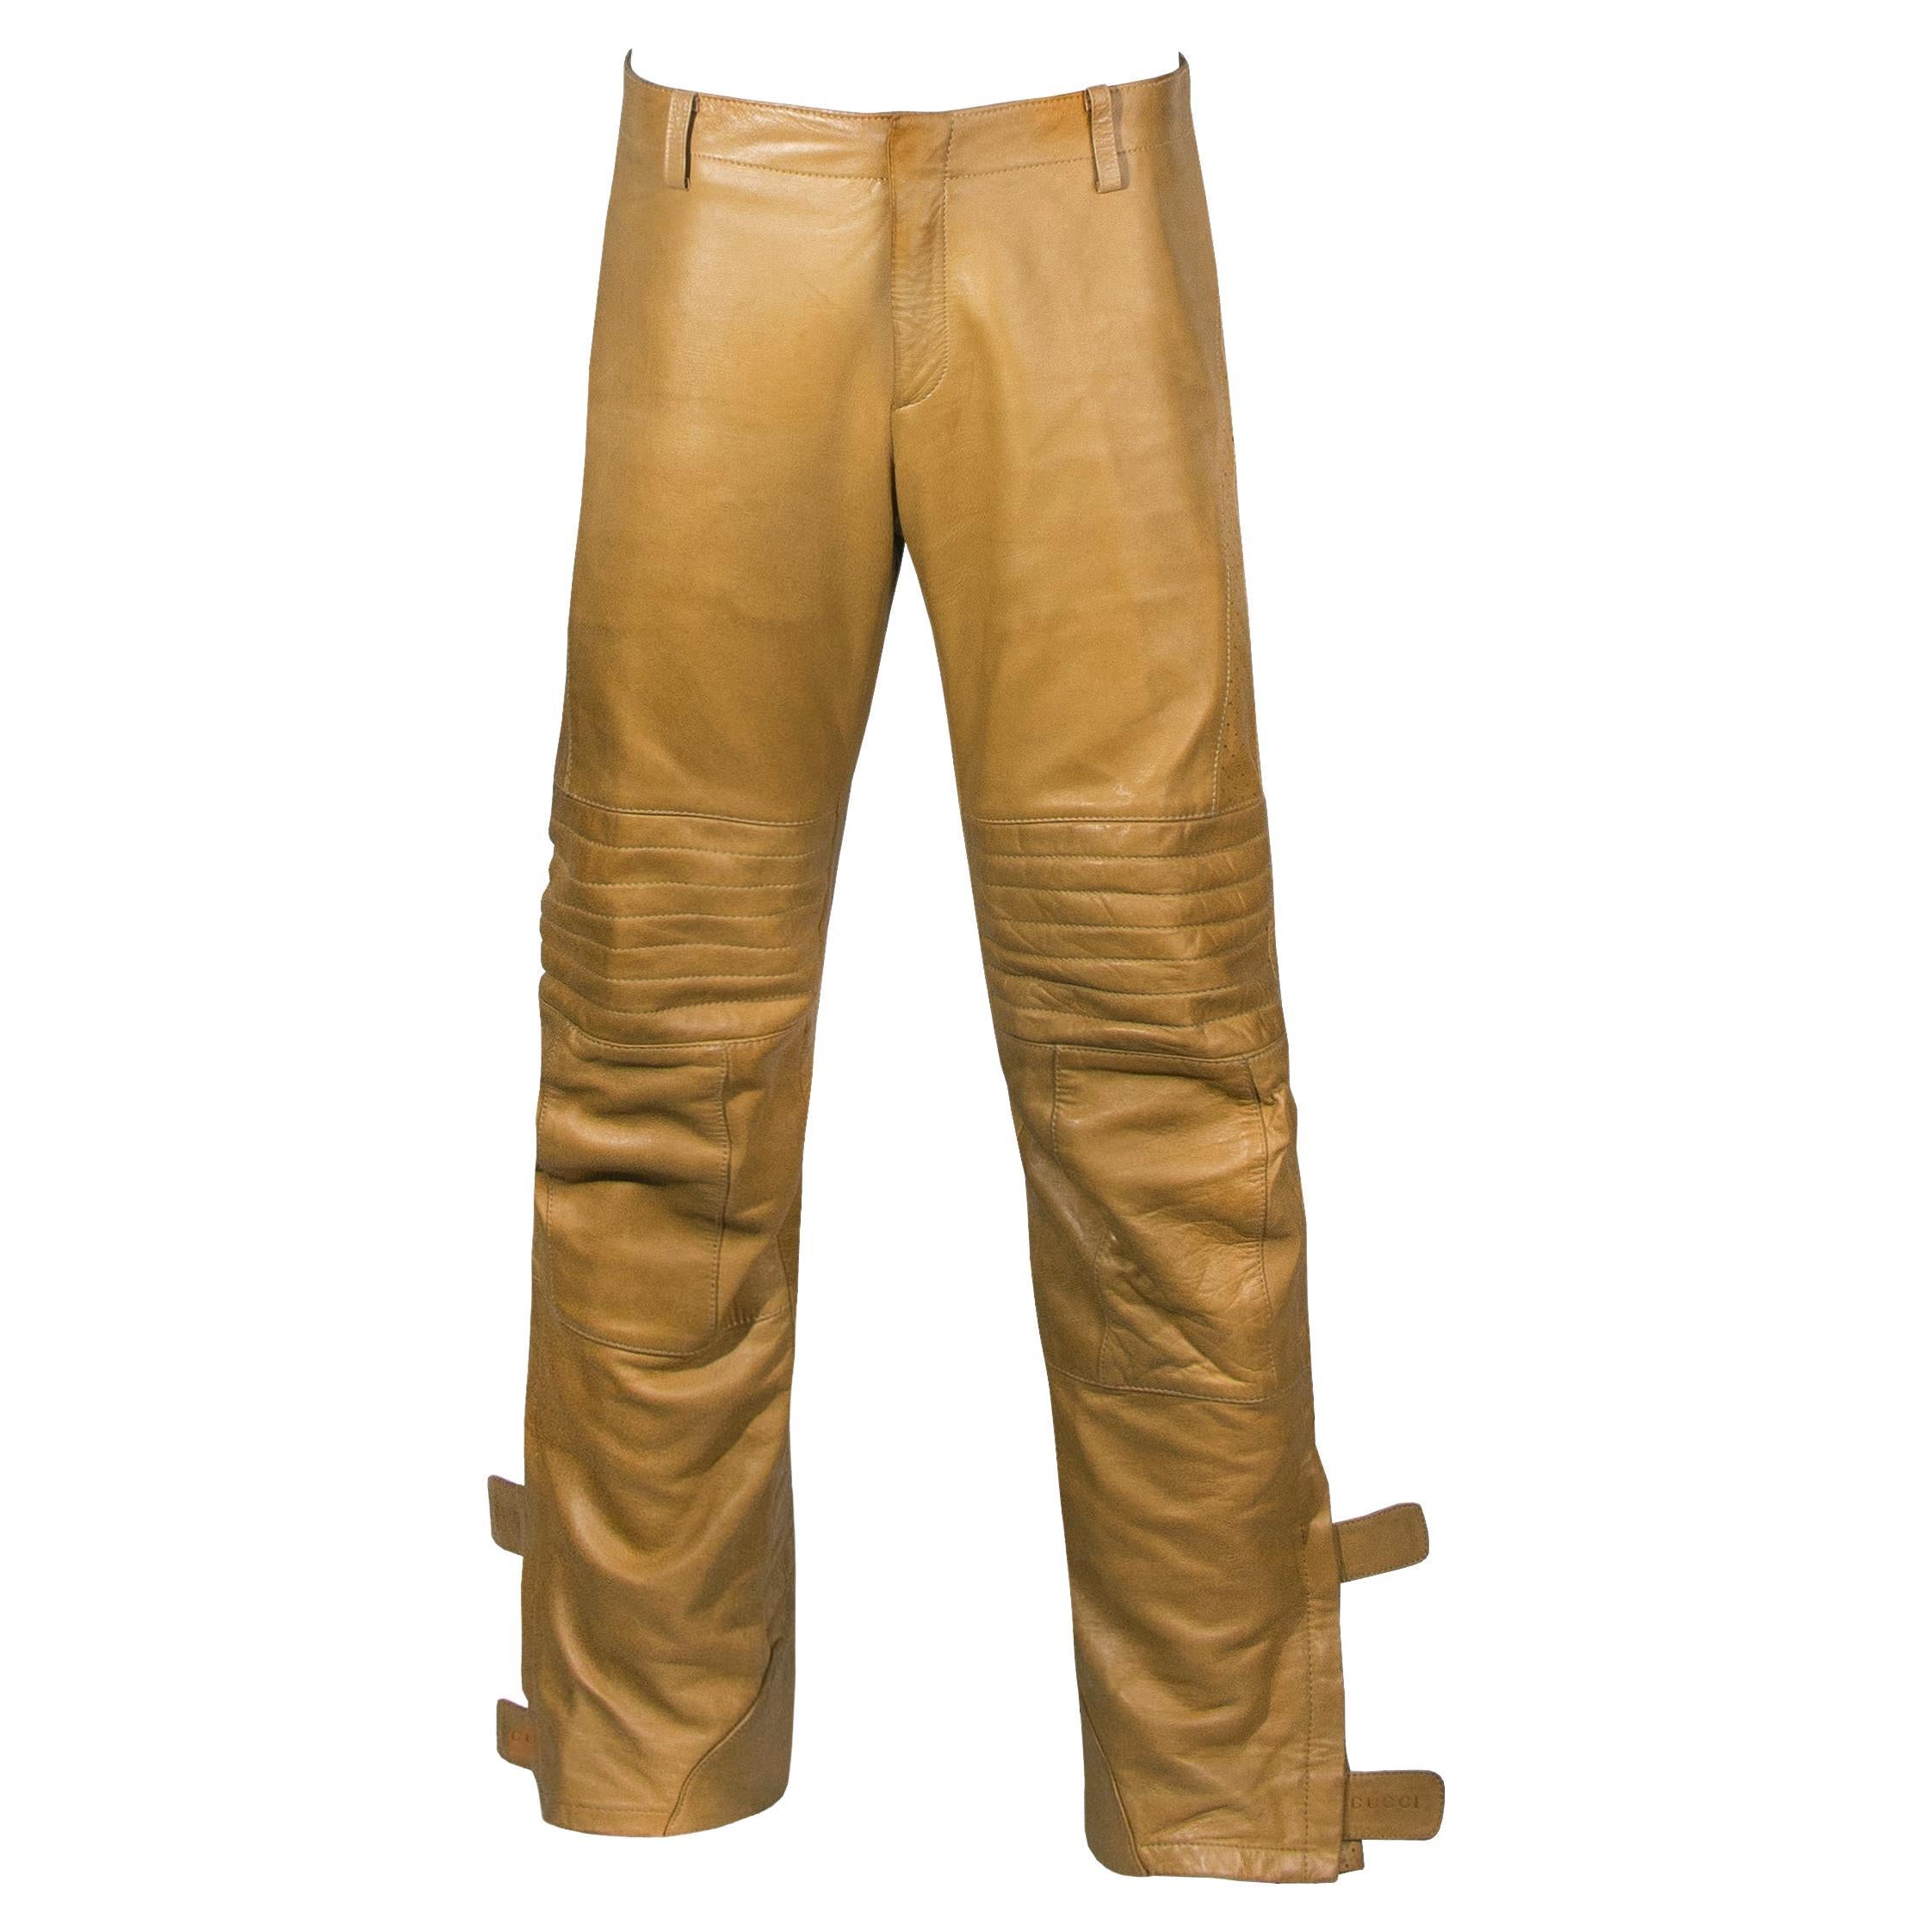 Gucci by Tom Ford men's tan leather motorcycle pants, fw 2000 For Sale